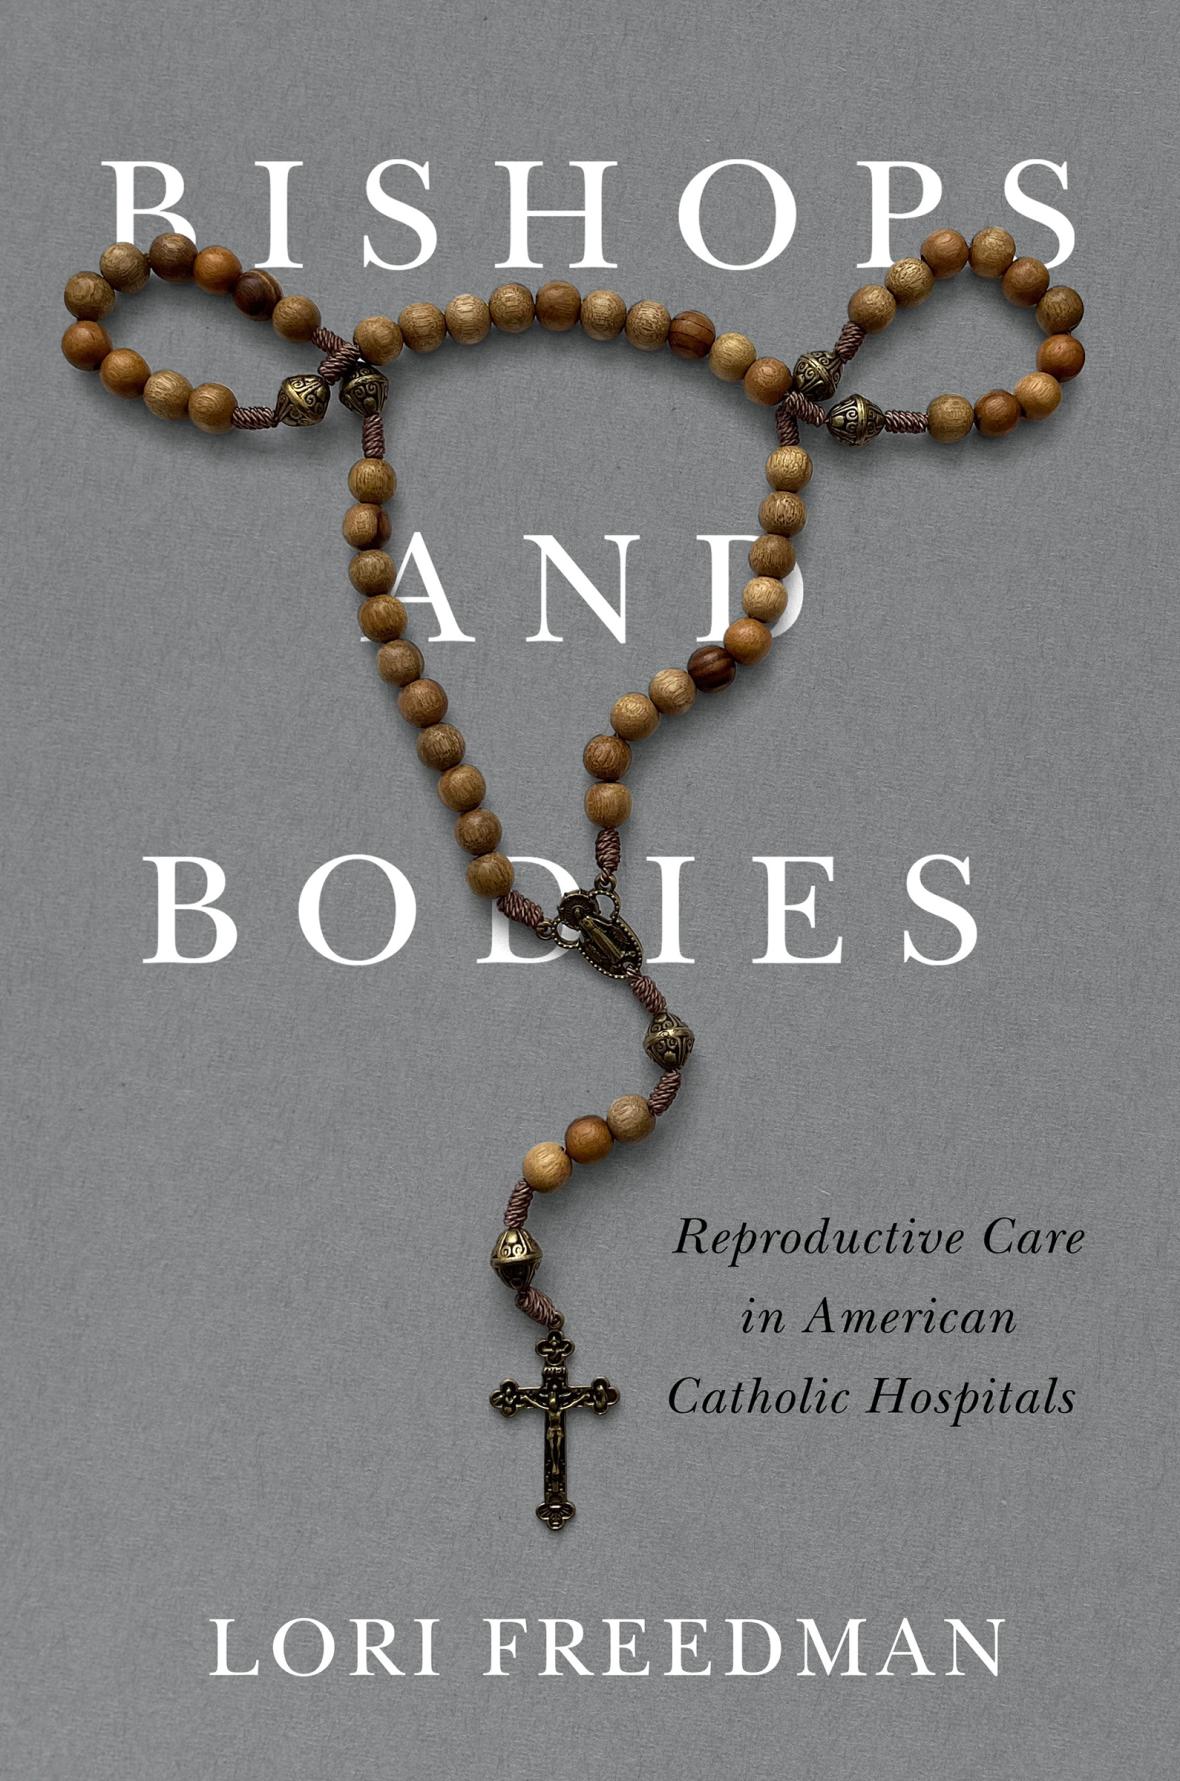 A cover image of Bishops and Bodies by Lori Freedman